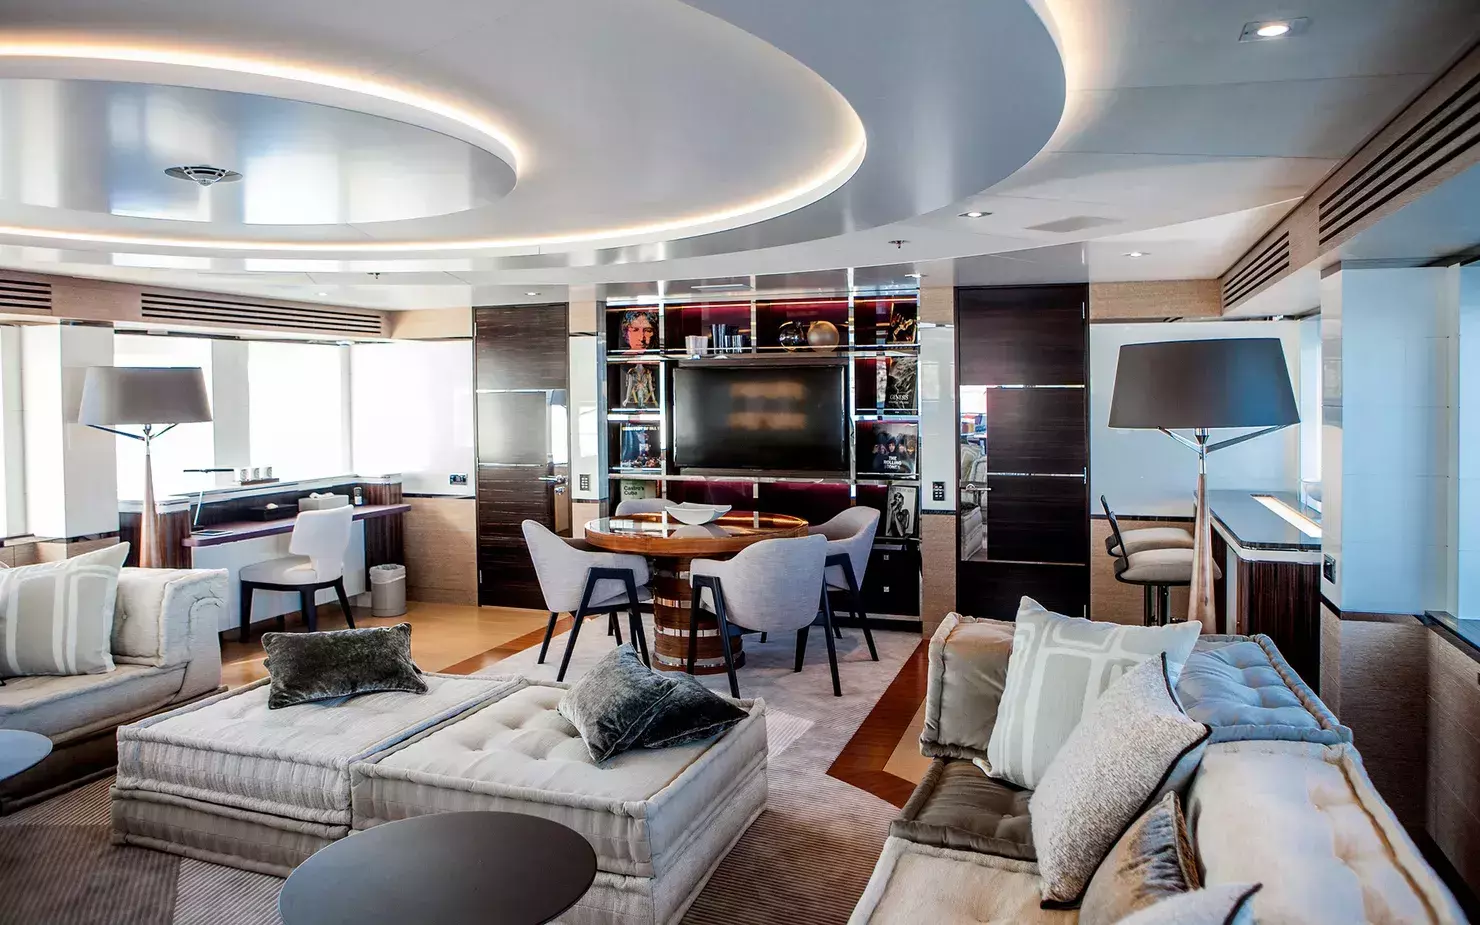 Asya by Heesen - Special Offer for a private Superyacht Charter in Cap DAil with a crew